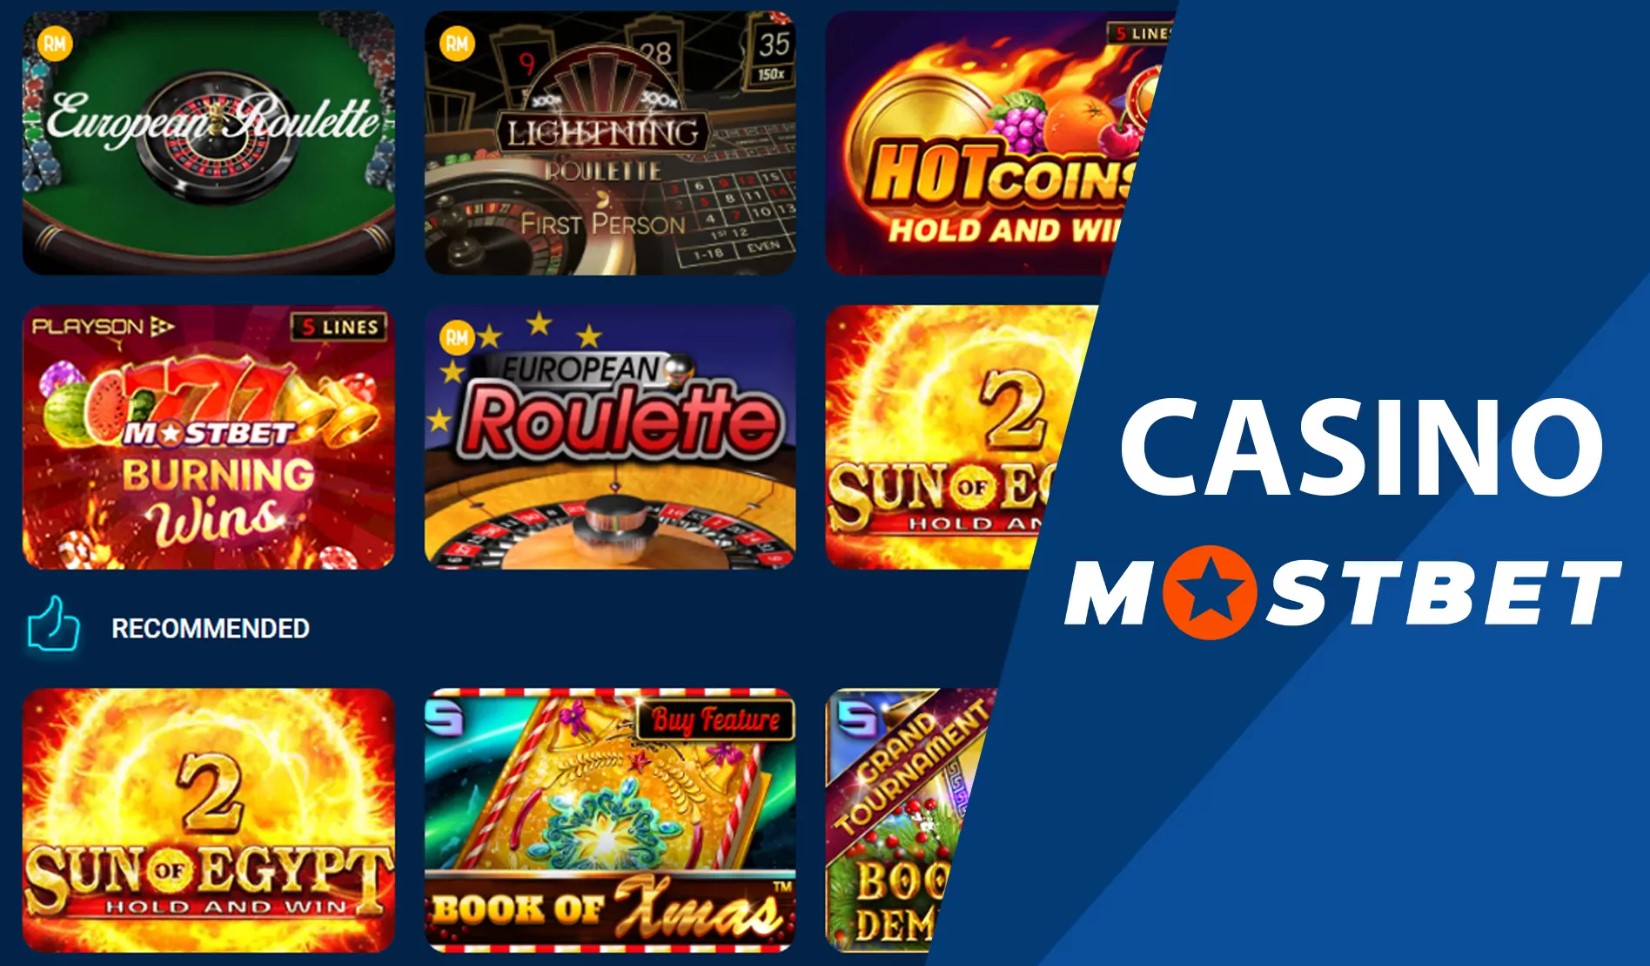 3 Ways To Have More Appealing casino